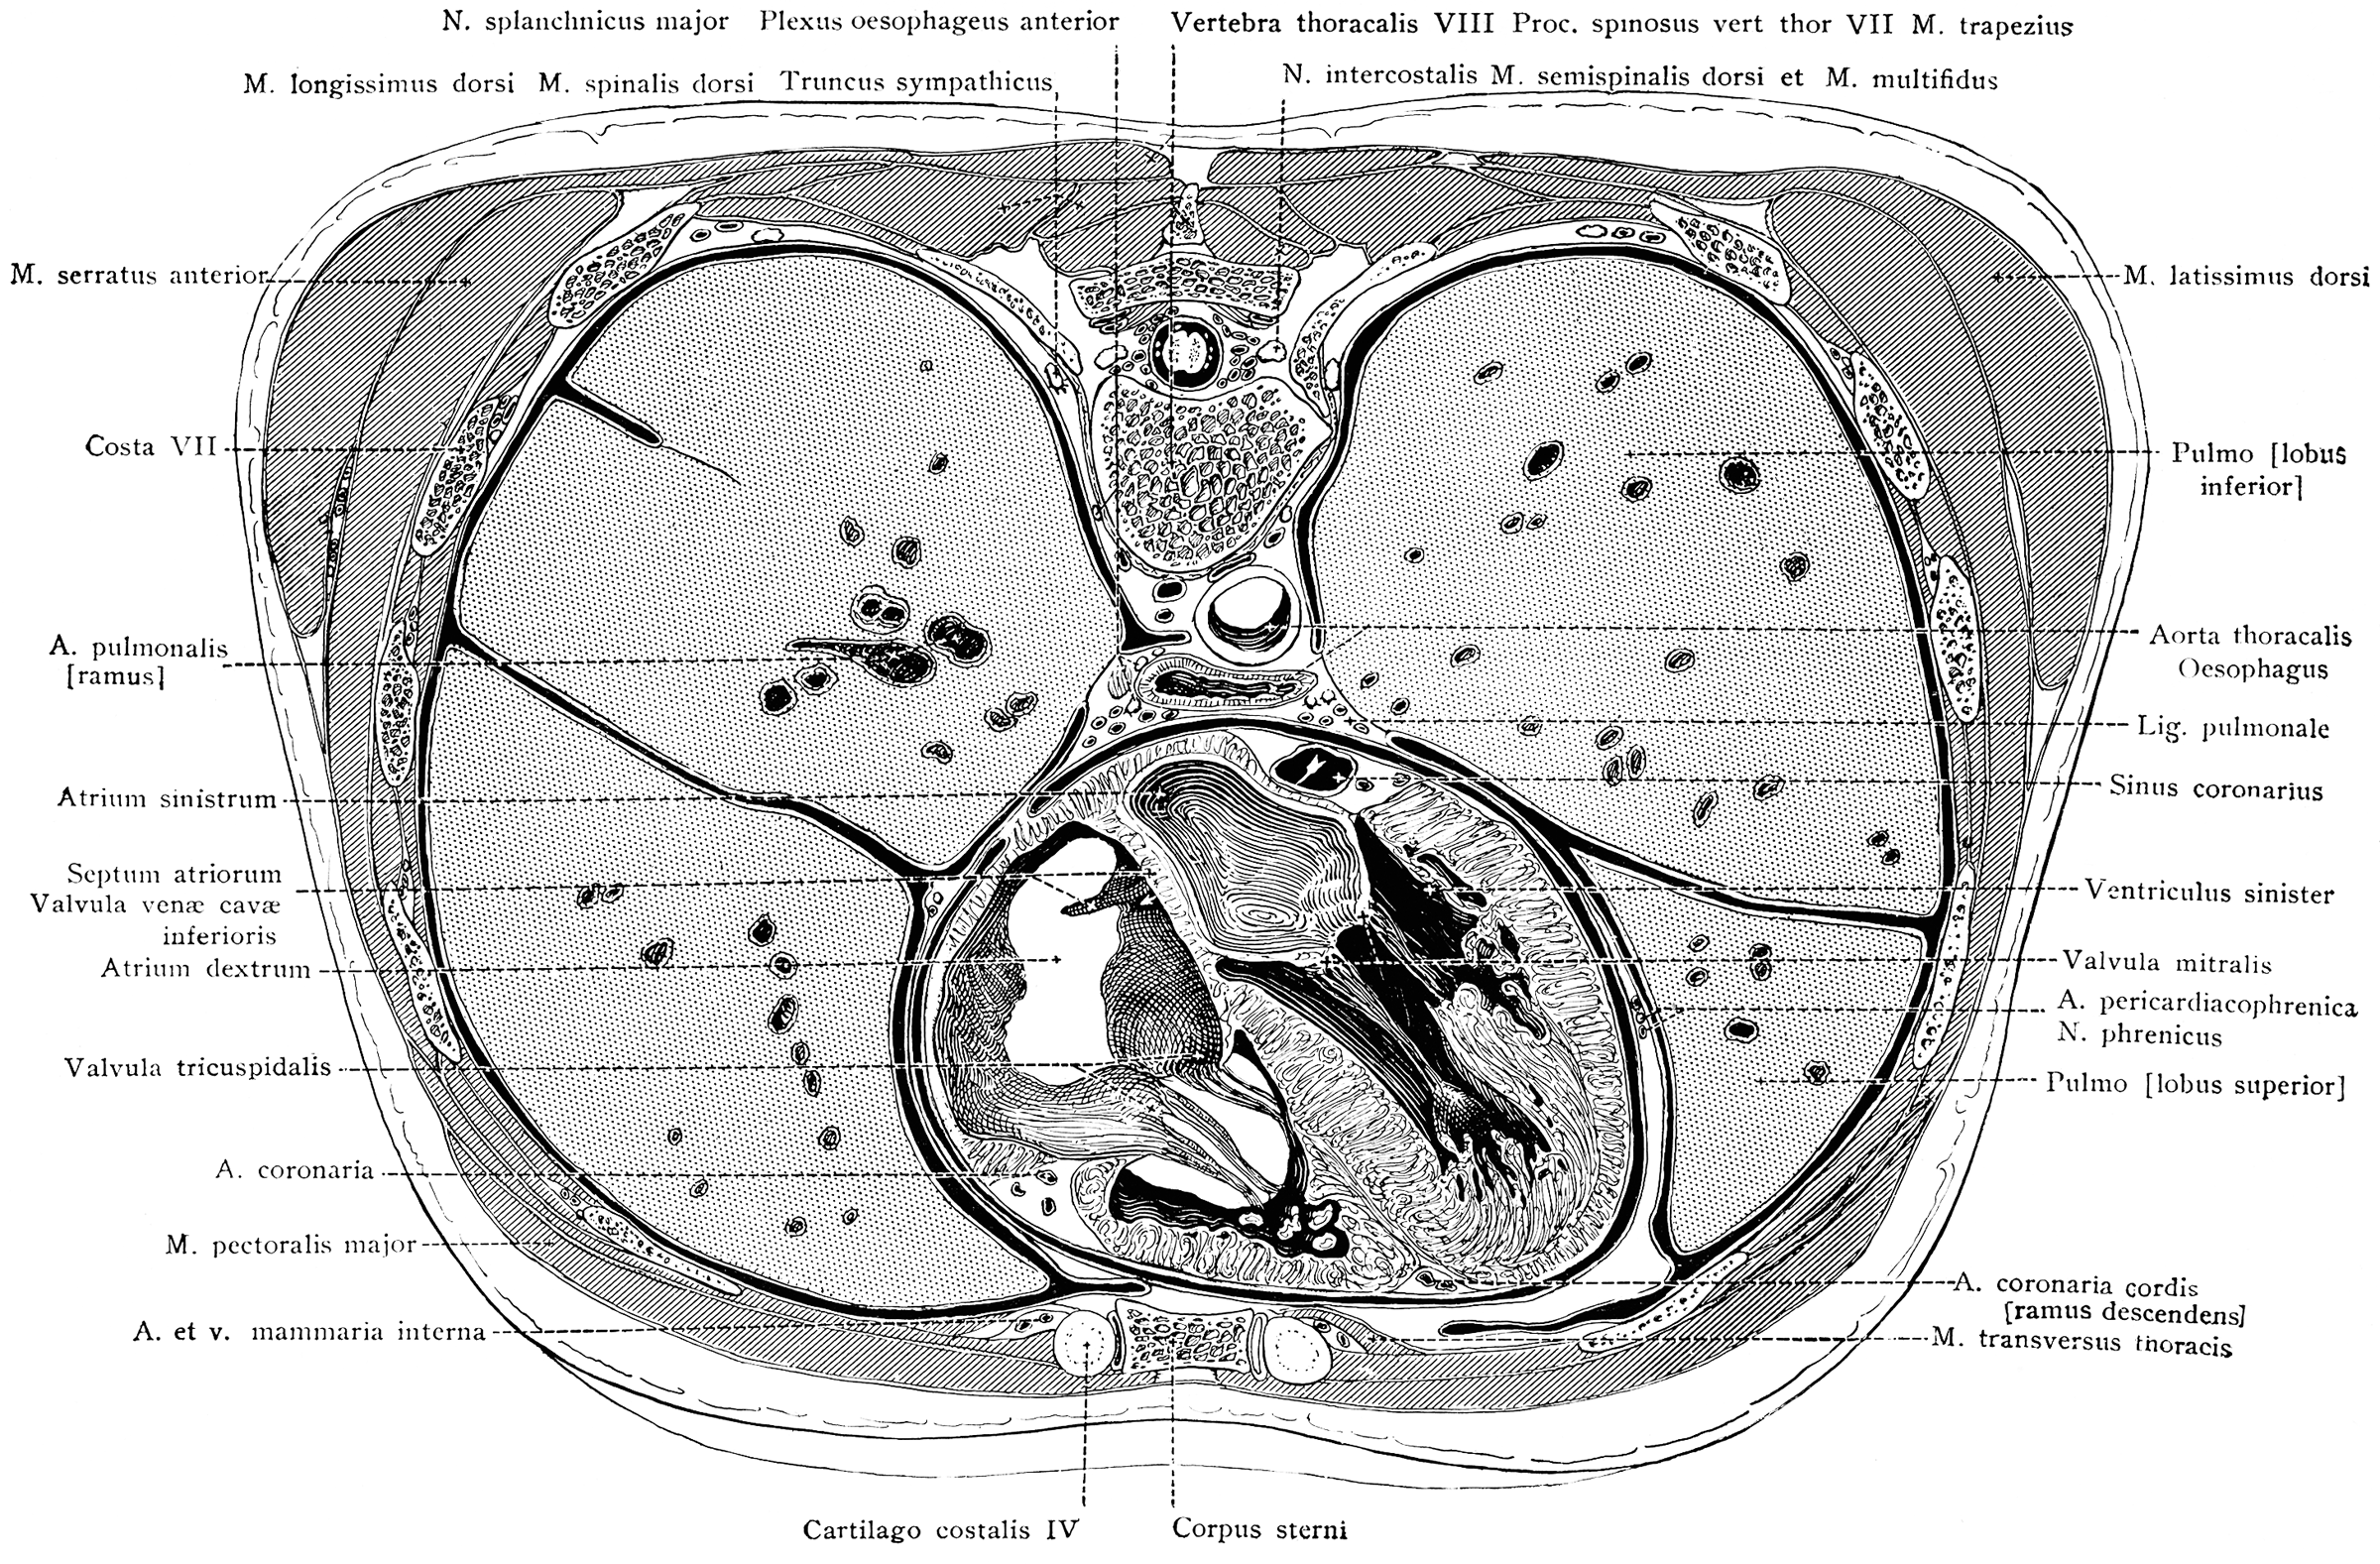 Cross Section of the Trunk Exposing the Ventricles of the Heart